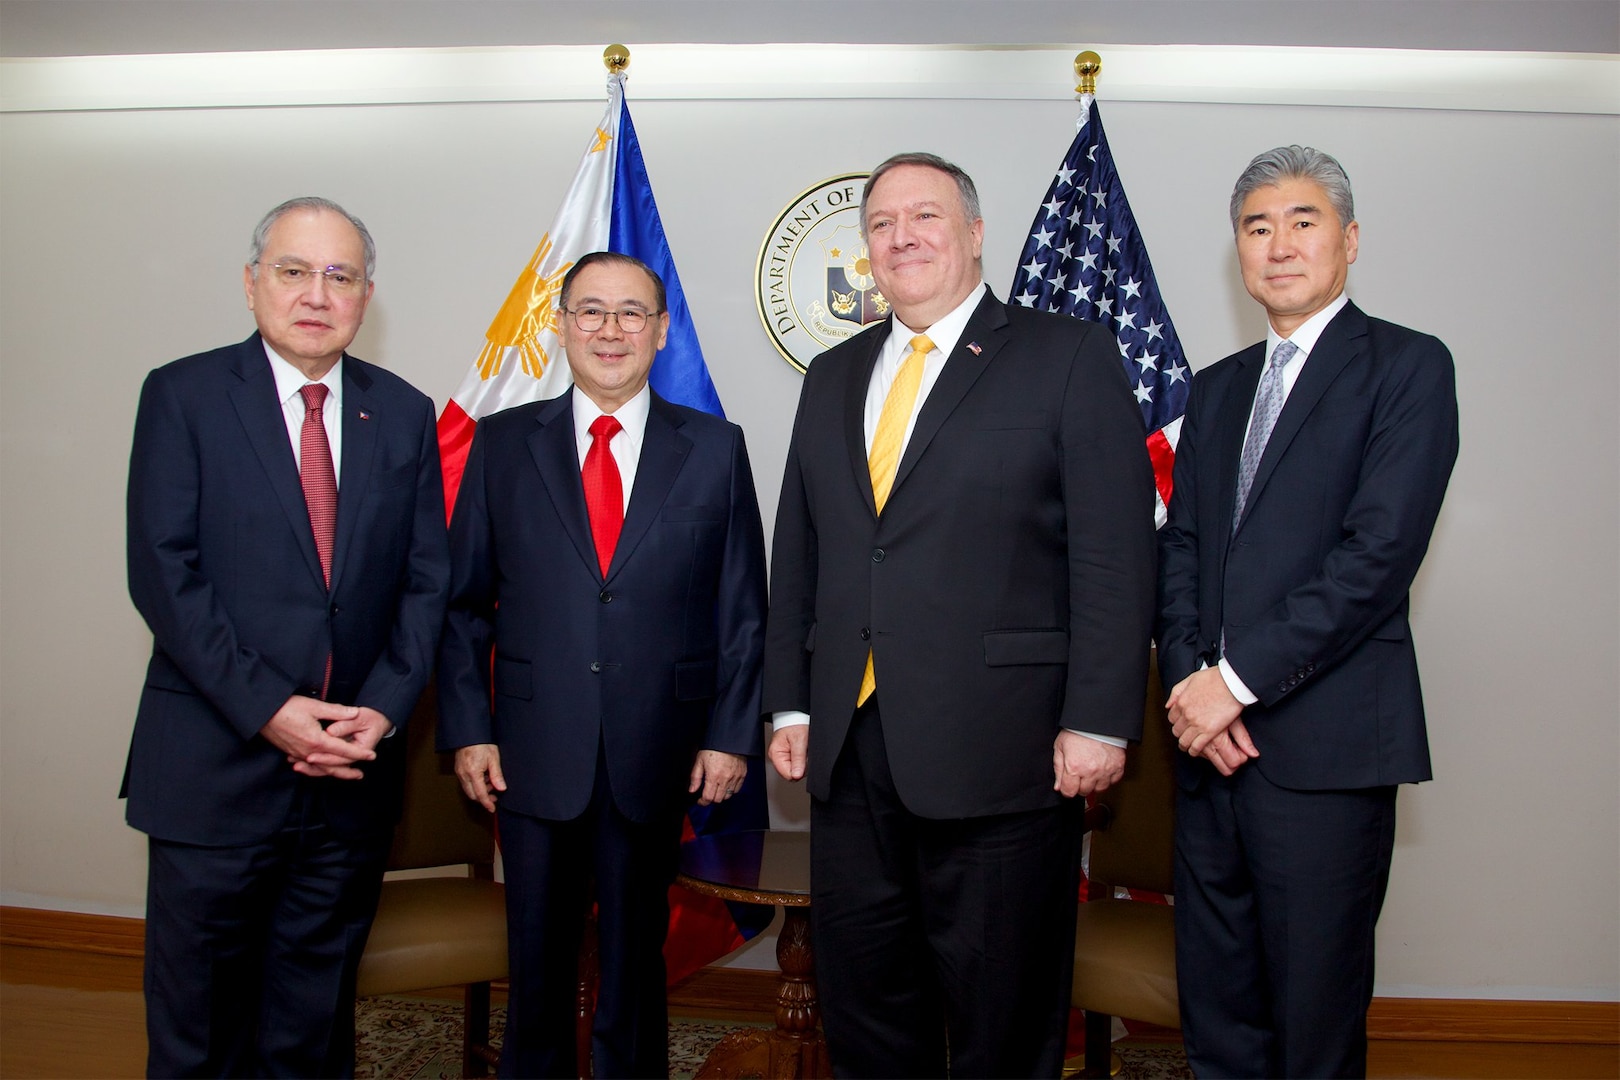 U.S. Secretary of State’s Visit Reaffirms Strong U.S.-Philippines Ties